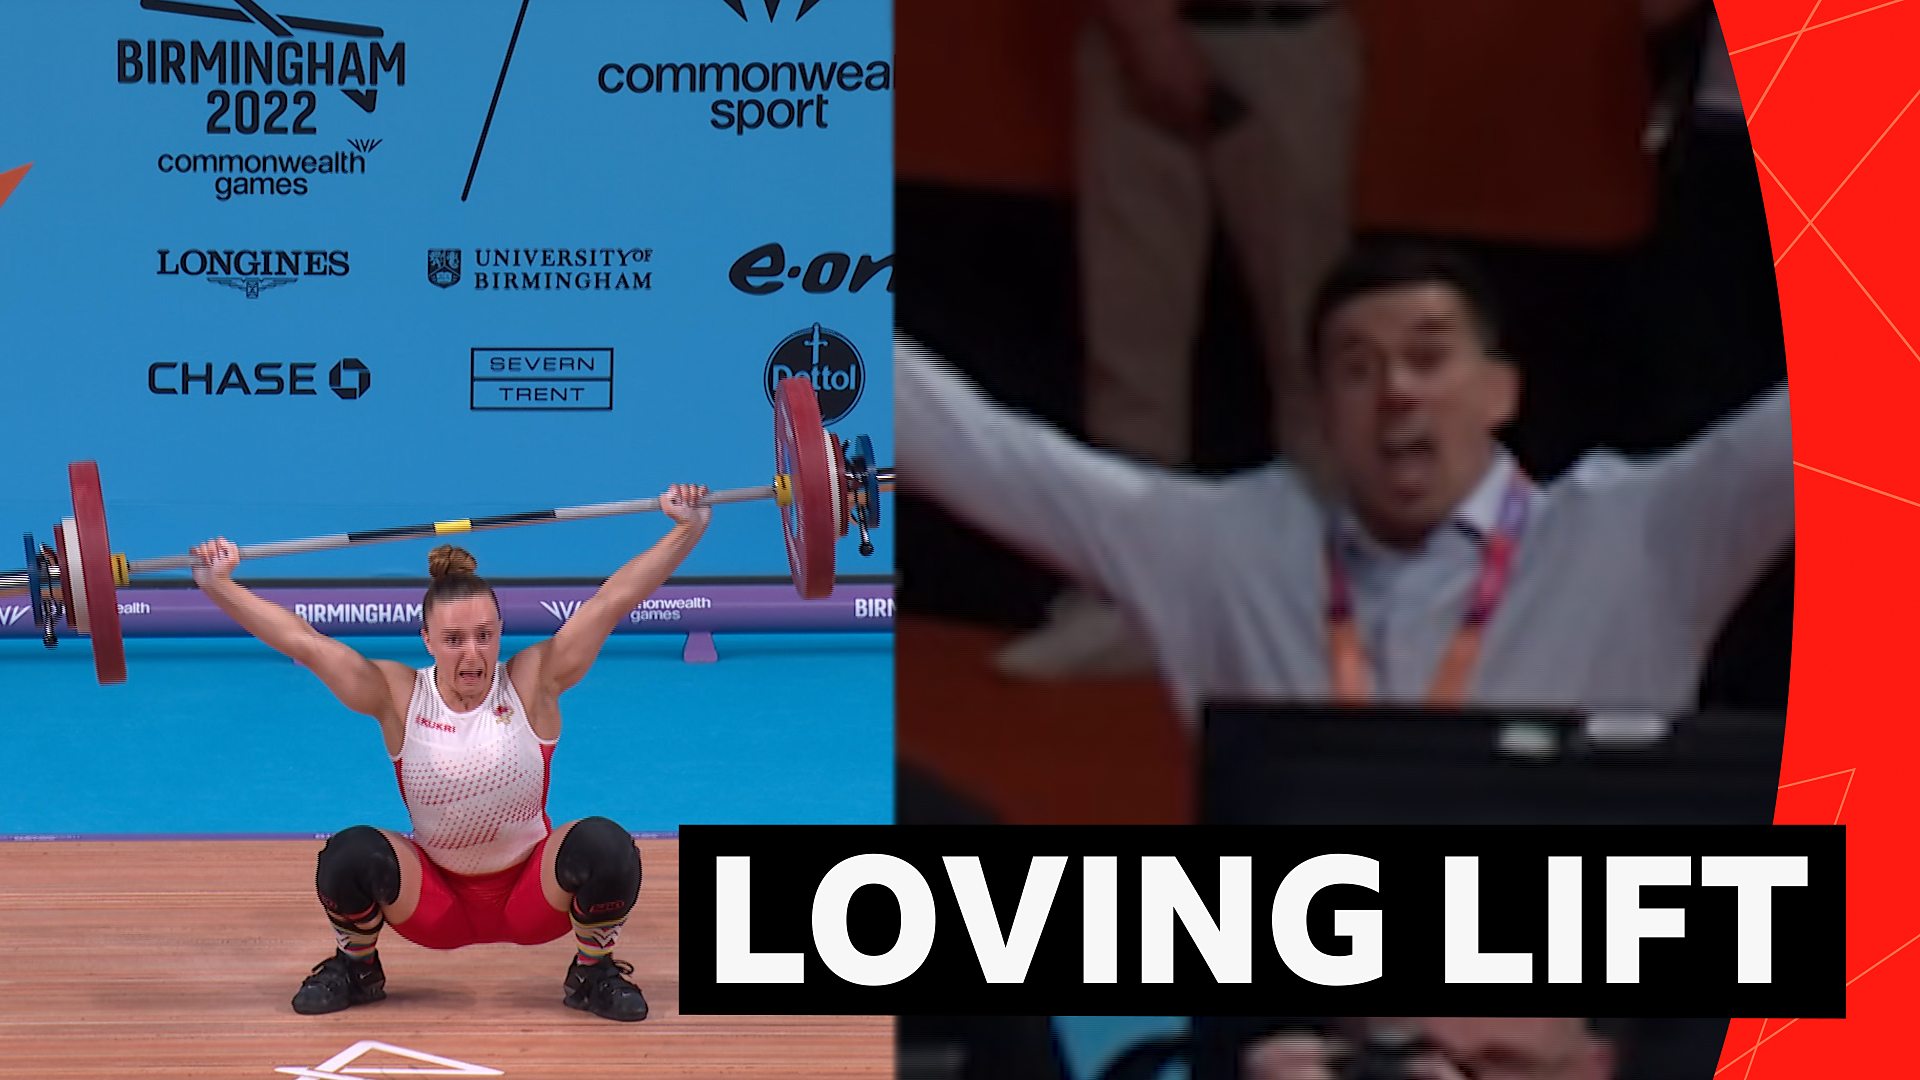 Commonwealth Games 2022 Onlooker lives every moment of womens weightlifting